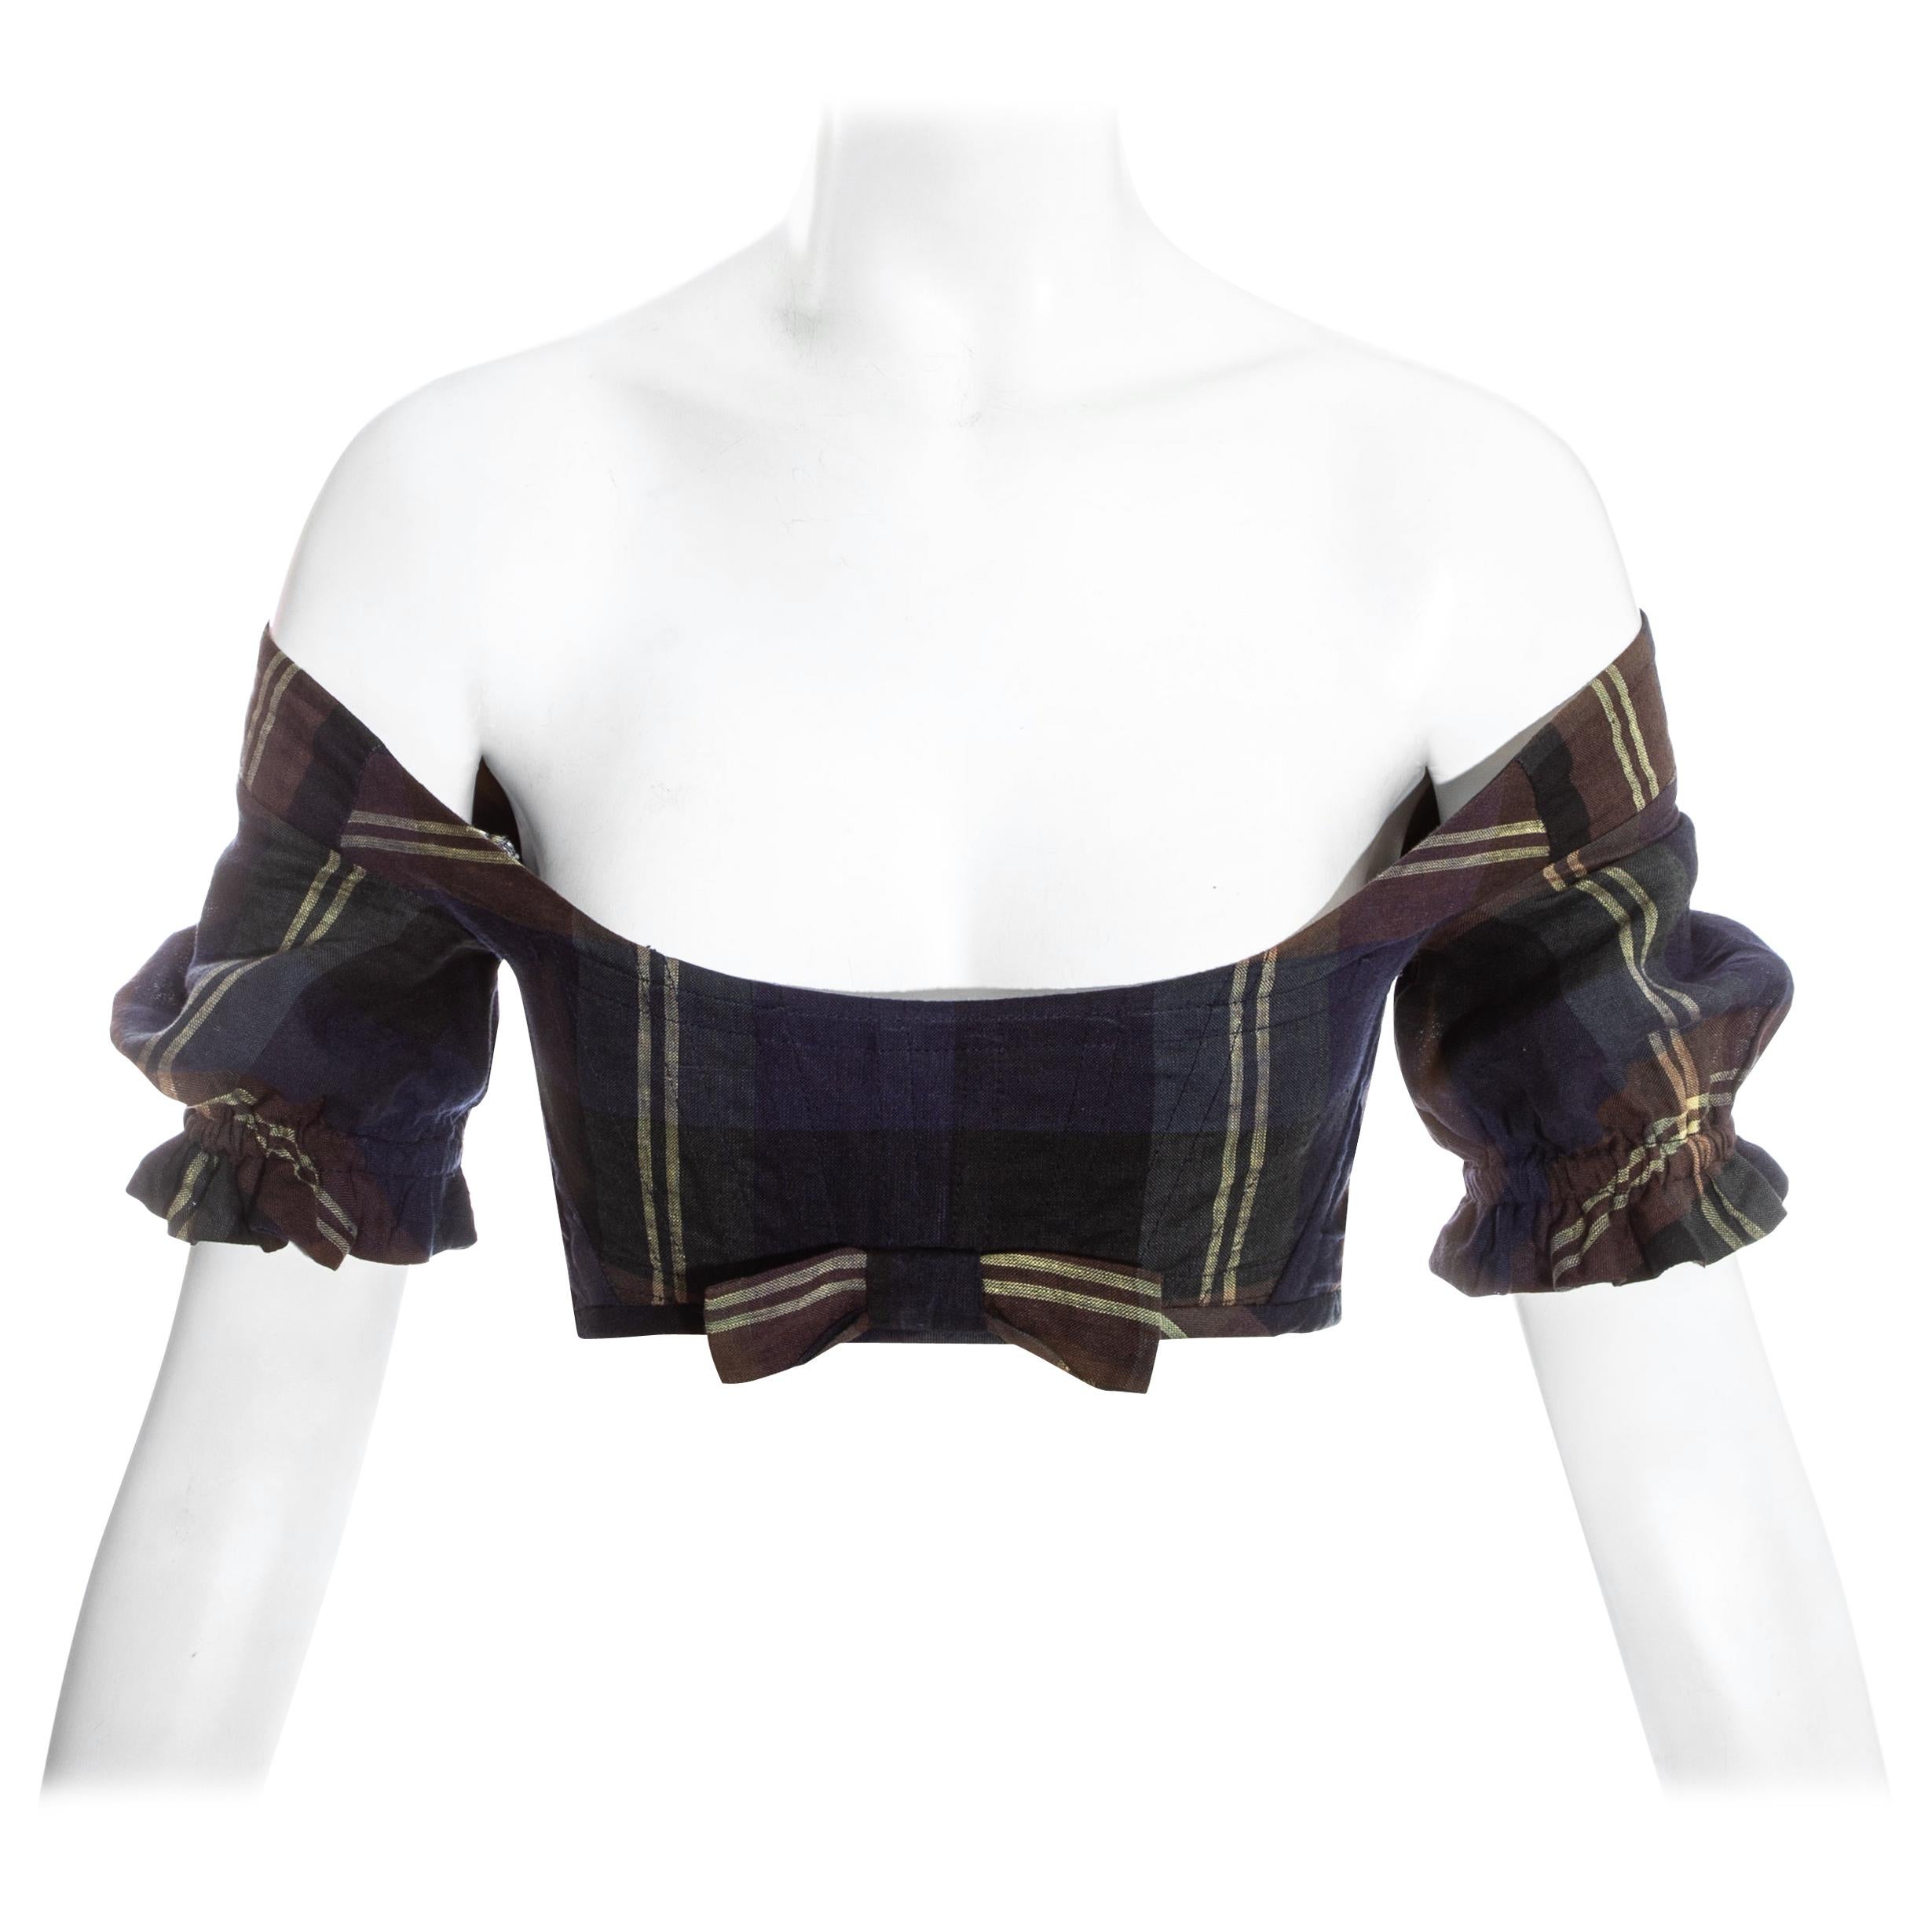 Vivienne Westwood cotton checked cropped corset top, c. 1990s